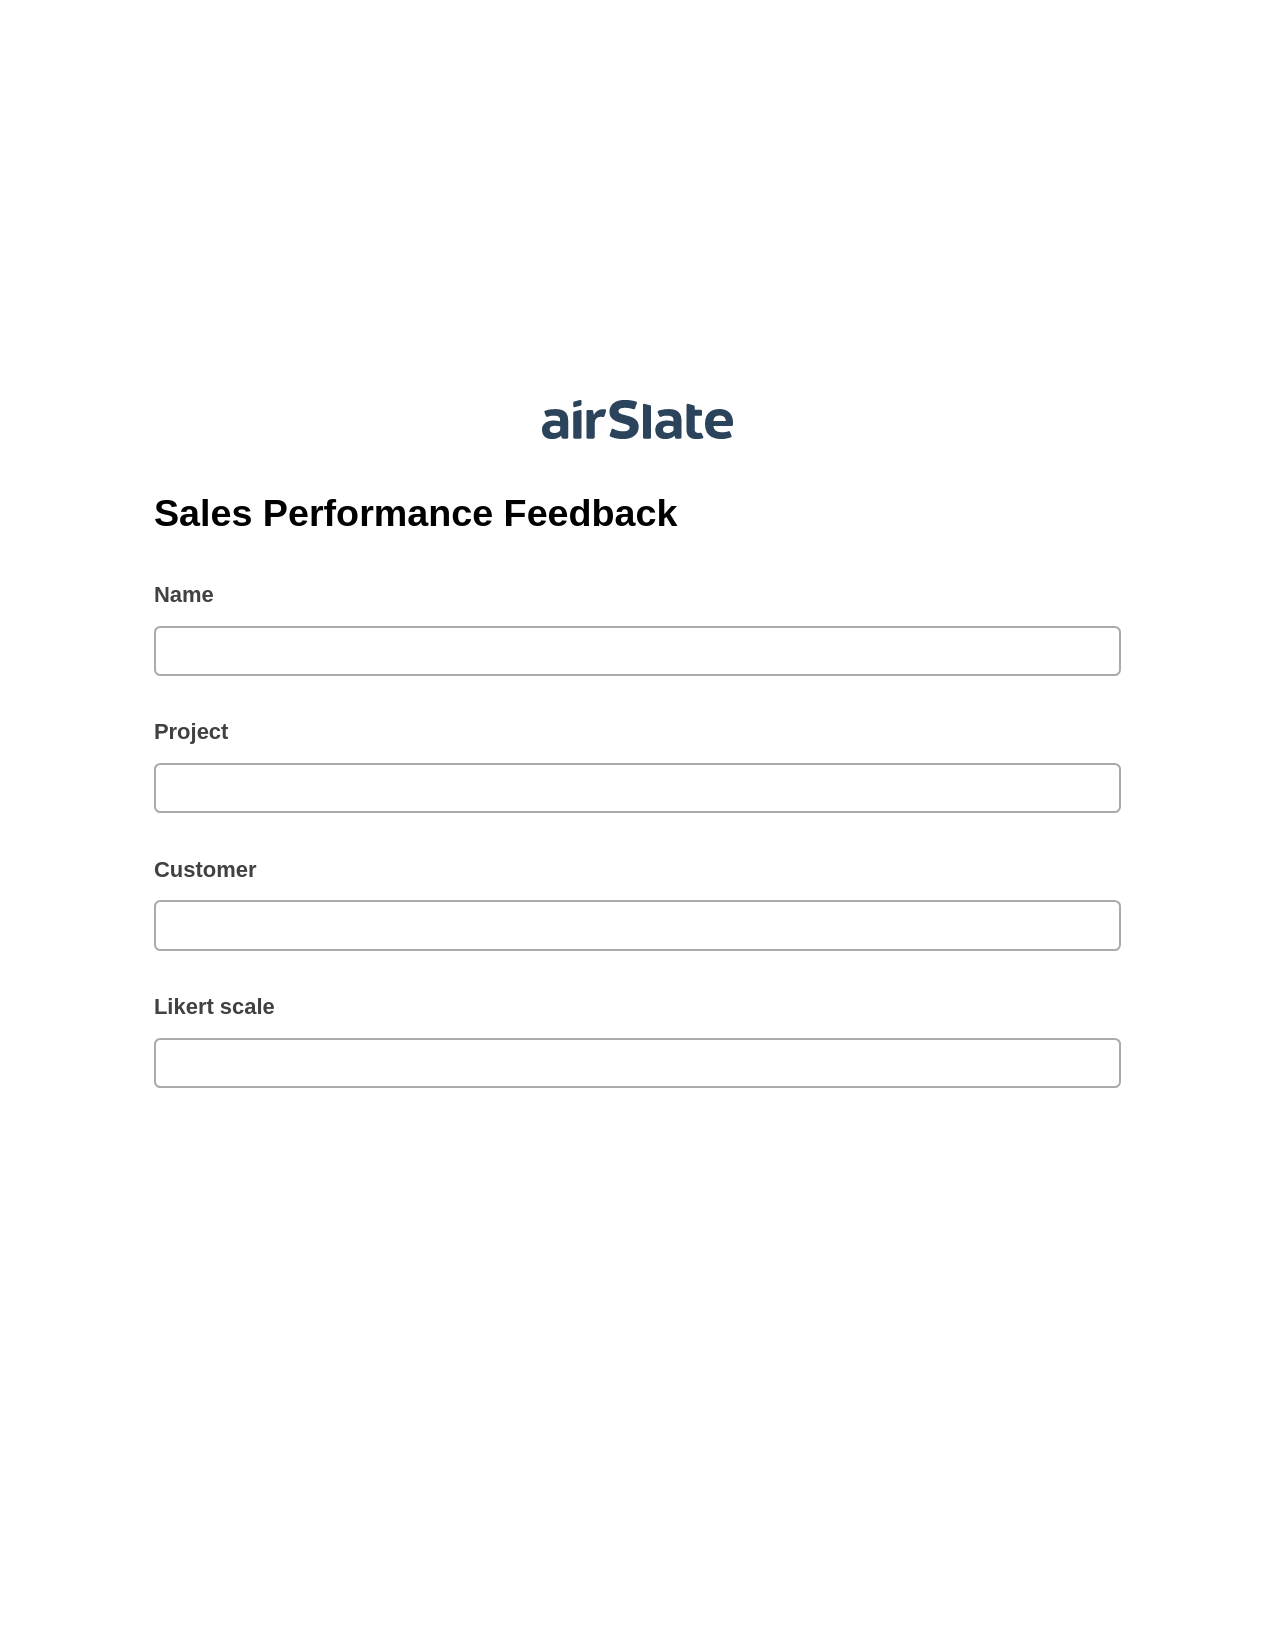 Sales Performance Feedback Pre-fill Slate from MS Dynamics 365 Records Bot, Send a Slate with Roles Bot, Export to Google Sheet Bot